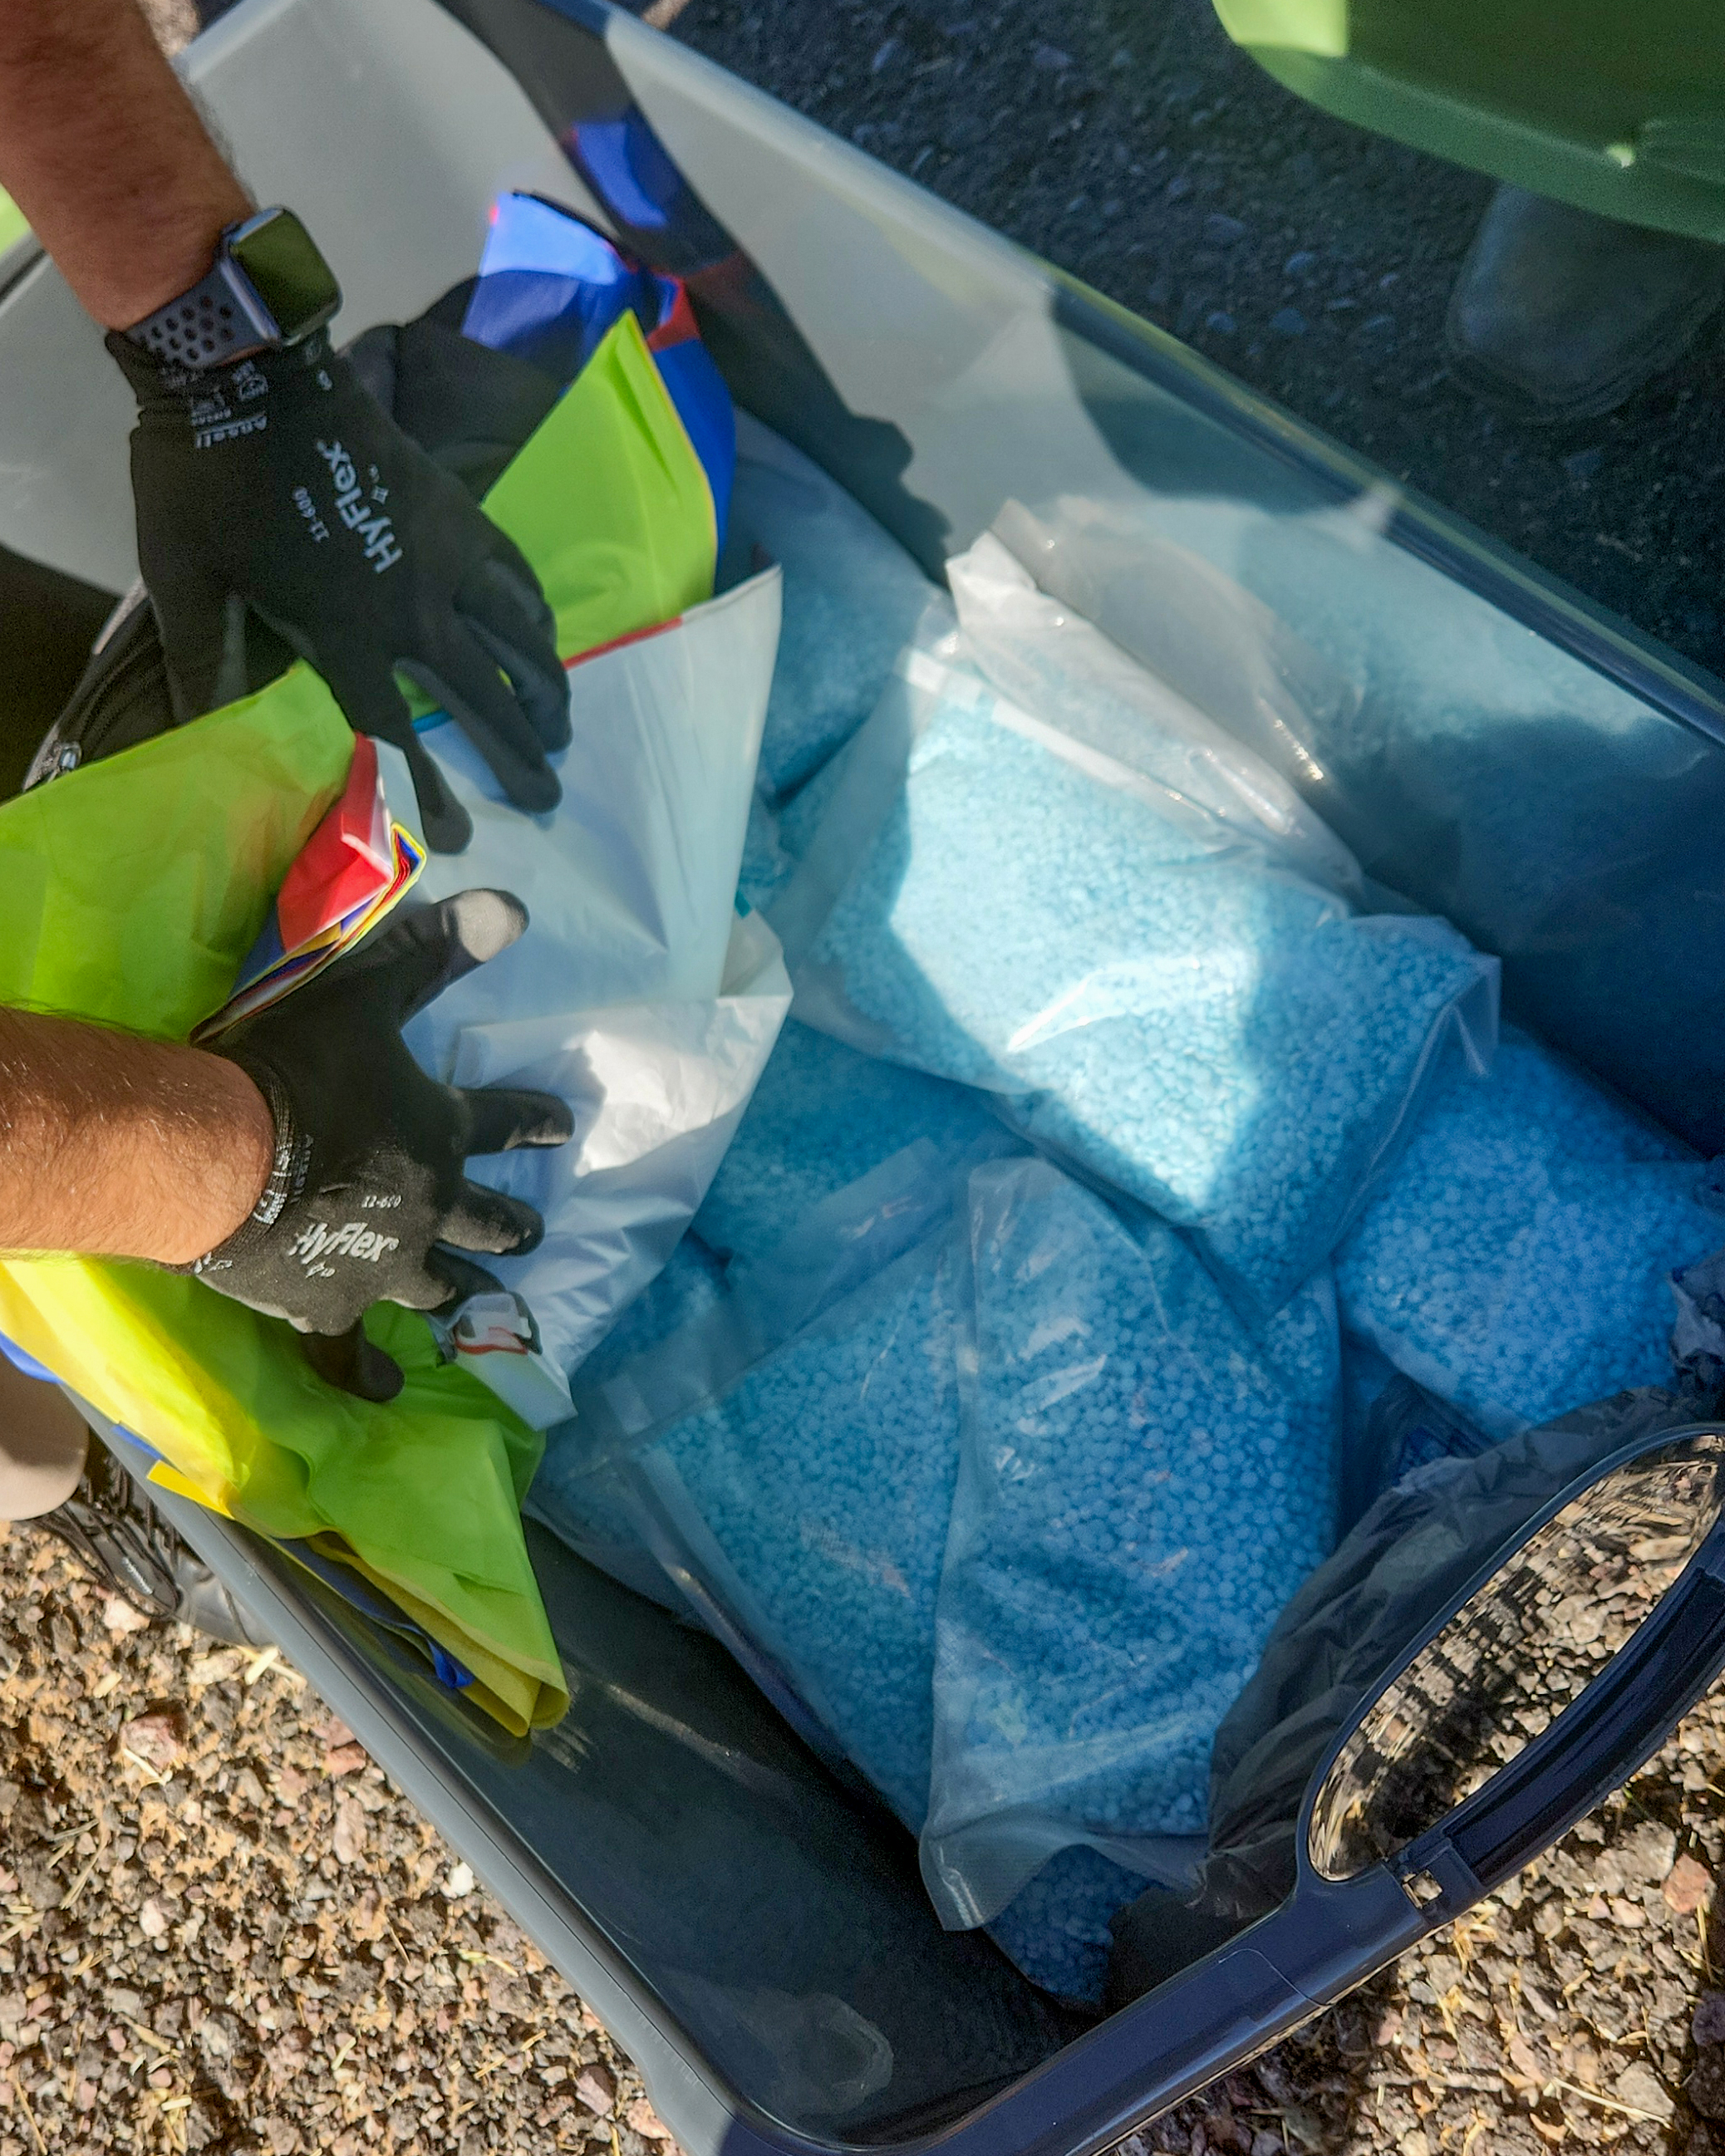 Plastic bags of blue pills in a plastic storage container